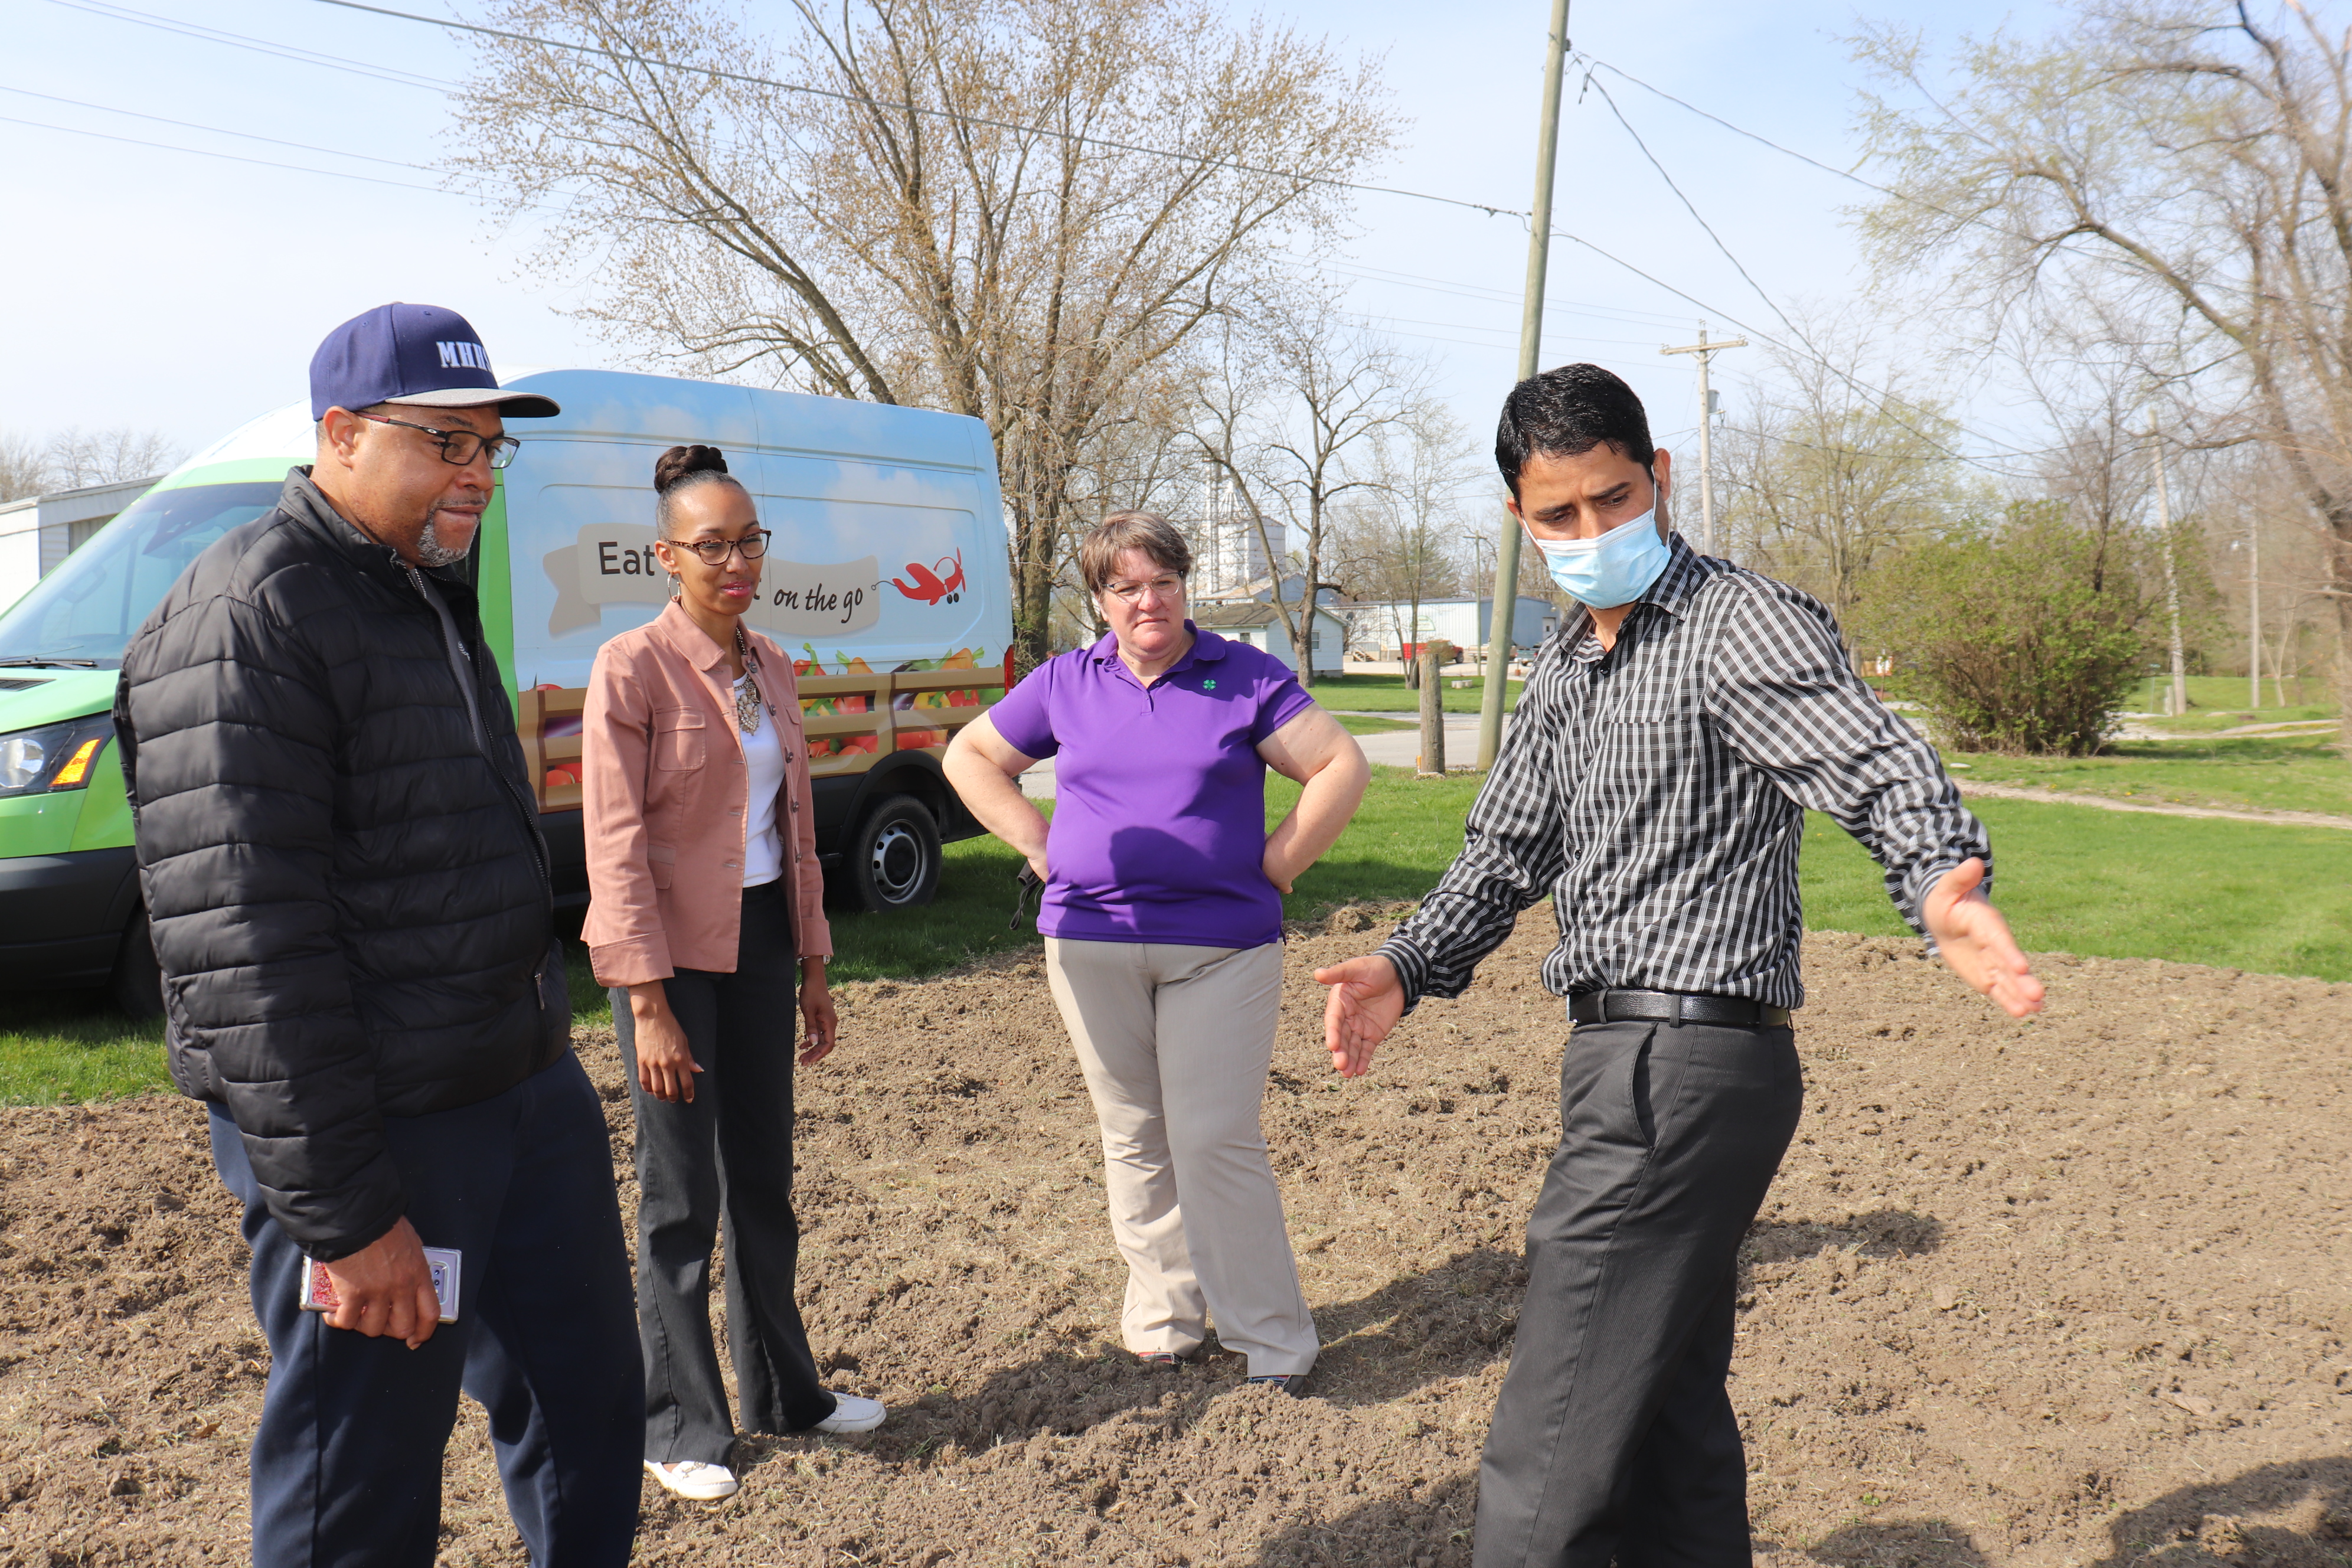 MU Extension agronomist Dhruba Dhakal, right, explains how the community garden at Faith Walk Academy should be plotted. Looking on are Michael and Mya McClain and MU Extension youth program associate Kathy Hasekamp. Photo by Linda Geist.